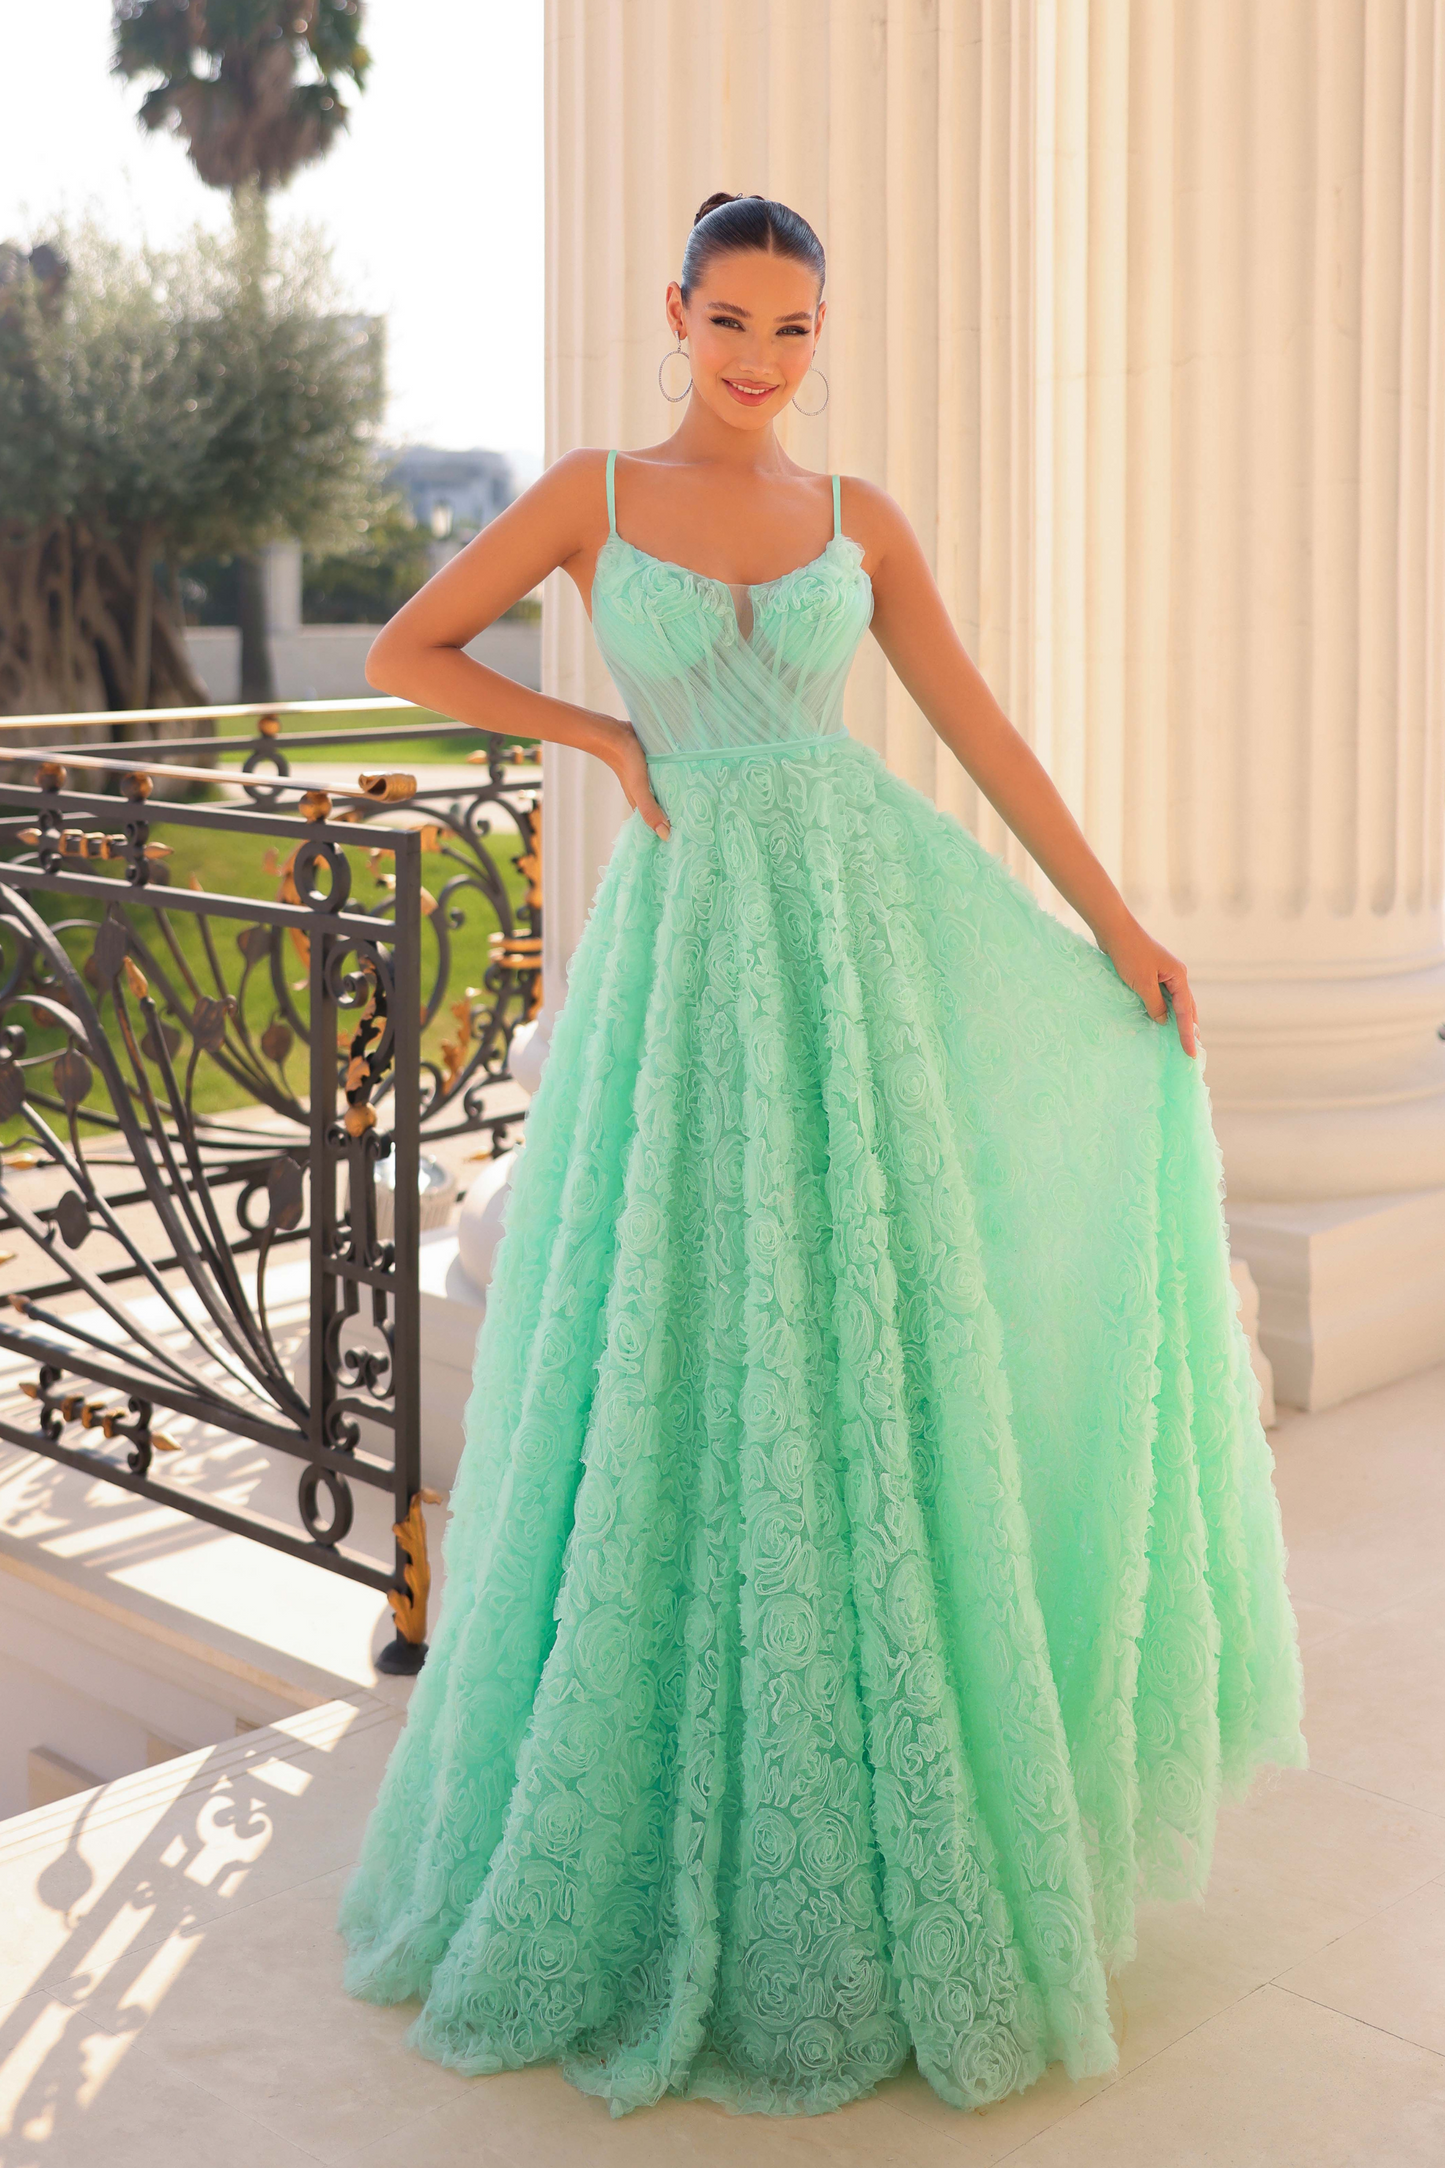 Tina Holly textured A line dress with corseted bodice and rosette details in mint green tulle